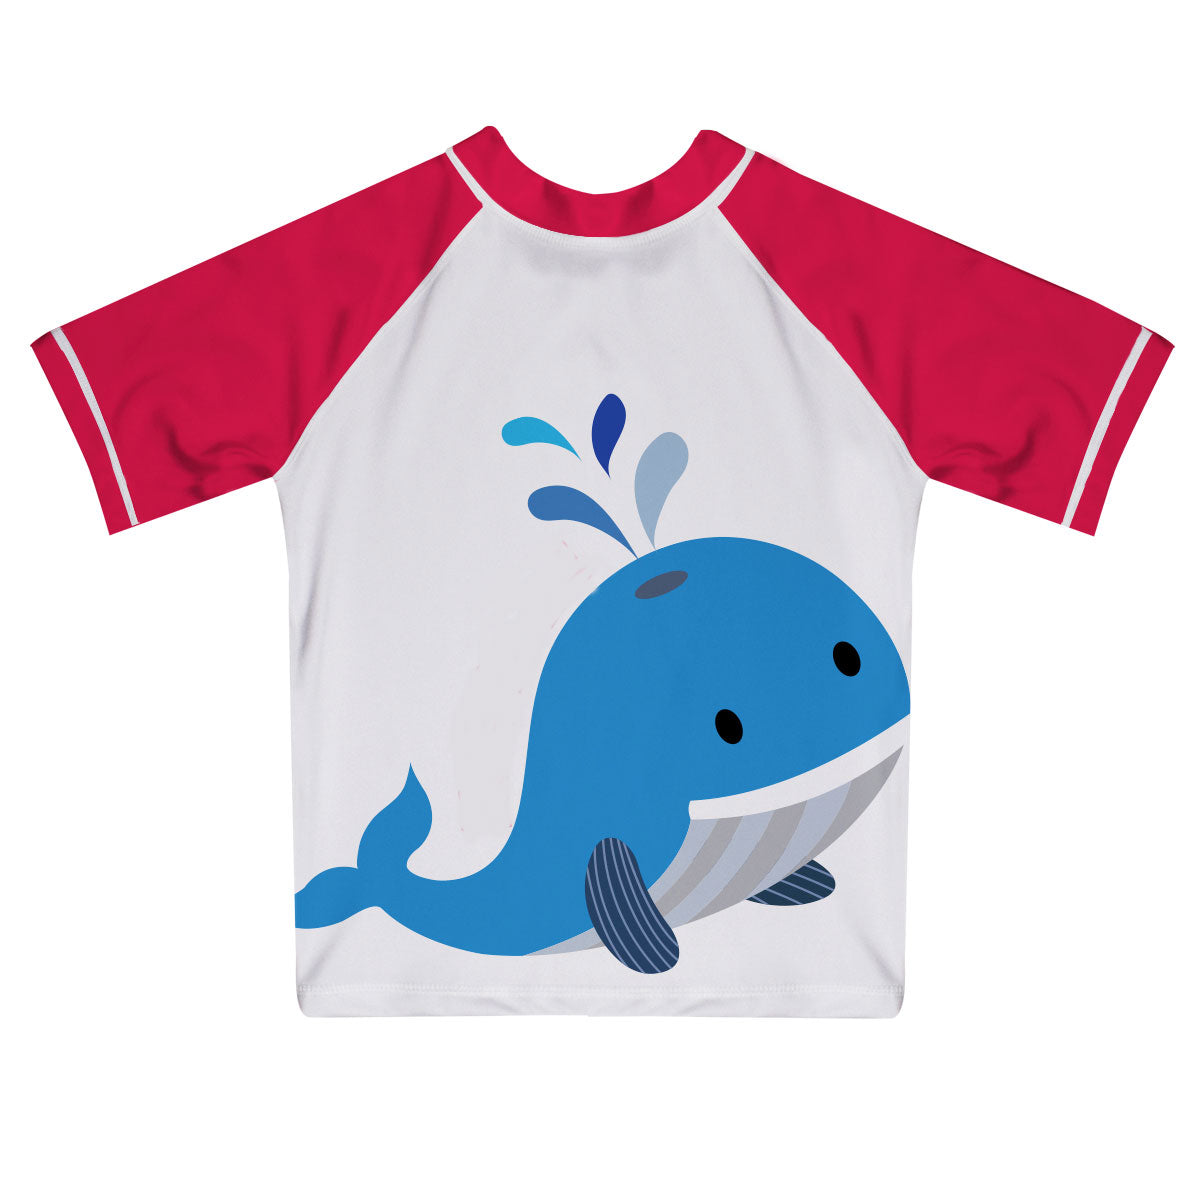 Whale Name White and Red Short Sleeve Rash Guard - Wimziy&Co.